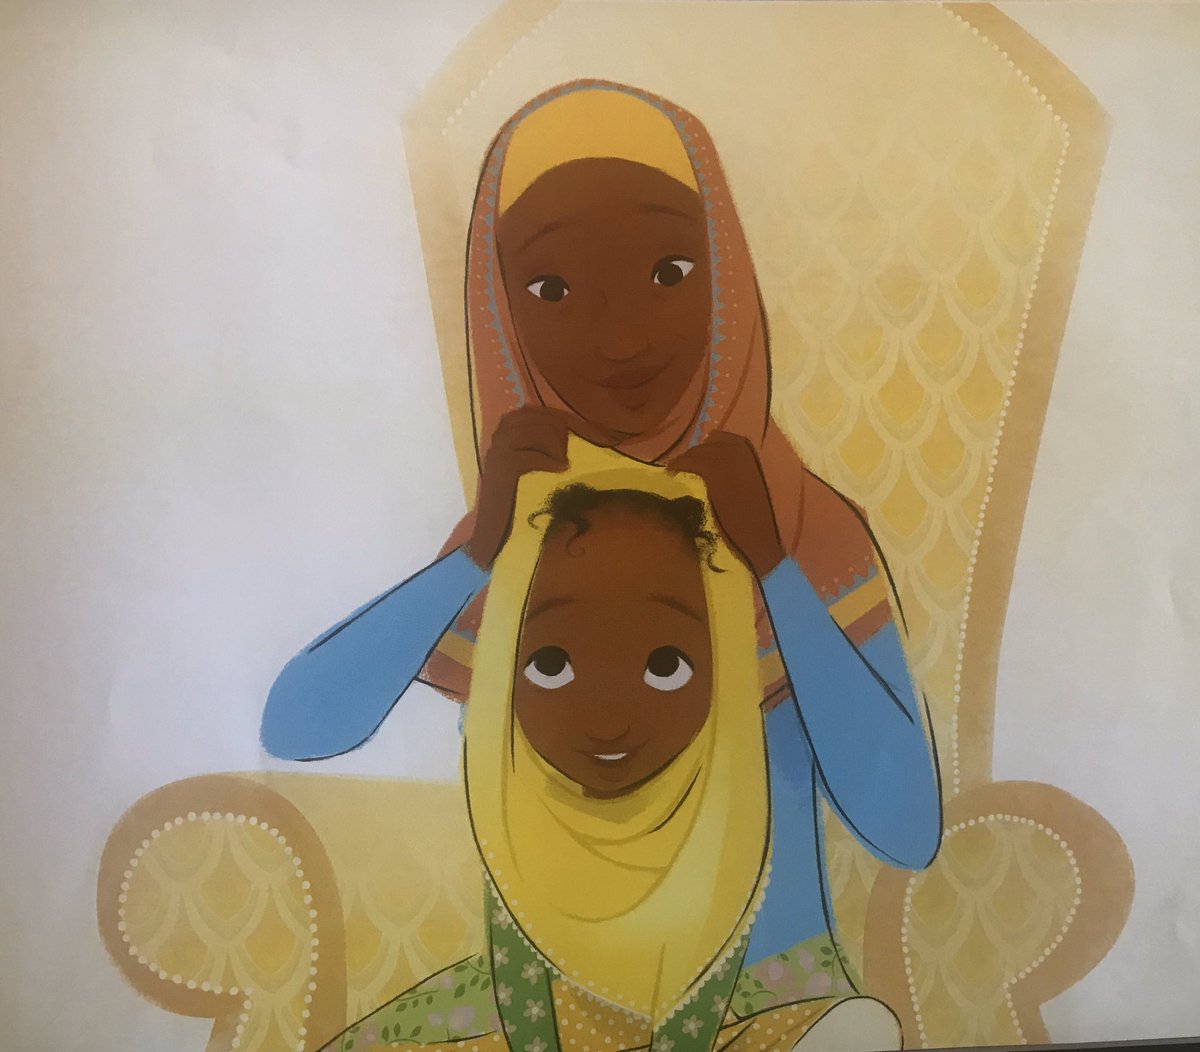 MOMMY’S KHIMAR is a story of  #BlackKidJoy. Please order it from an local indie store if you can. I recommend  @UncleBobbies since they are Black-owned and actively support Black and Muslim writers